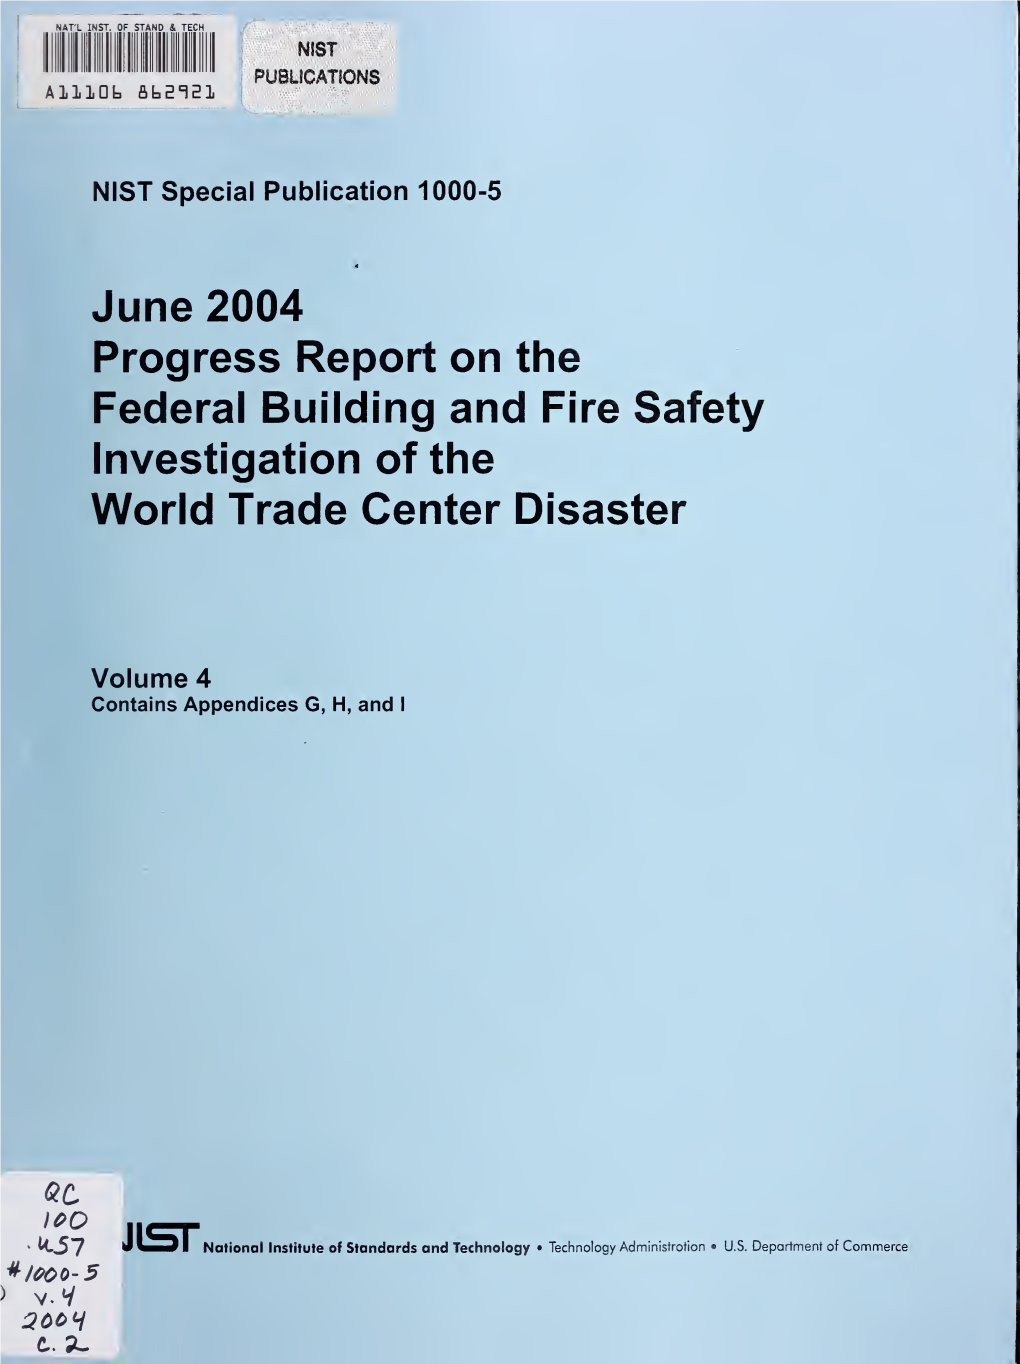 Progress Report on the Federal Building and Fire Safety Investigation of the World Trade Center Disaster